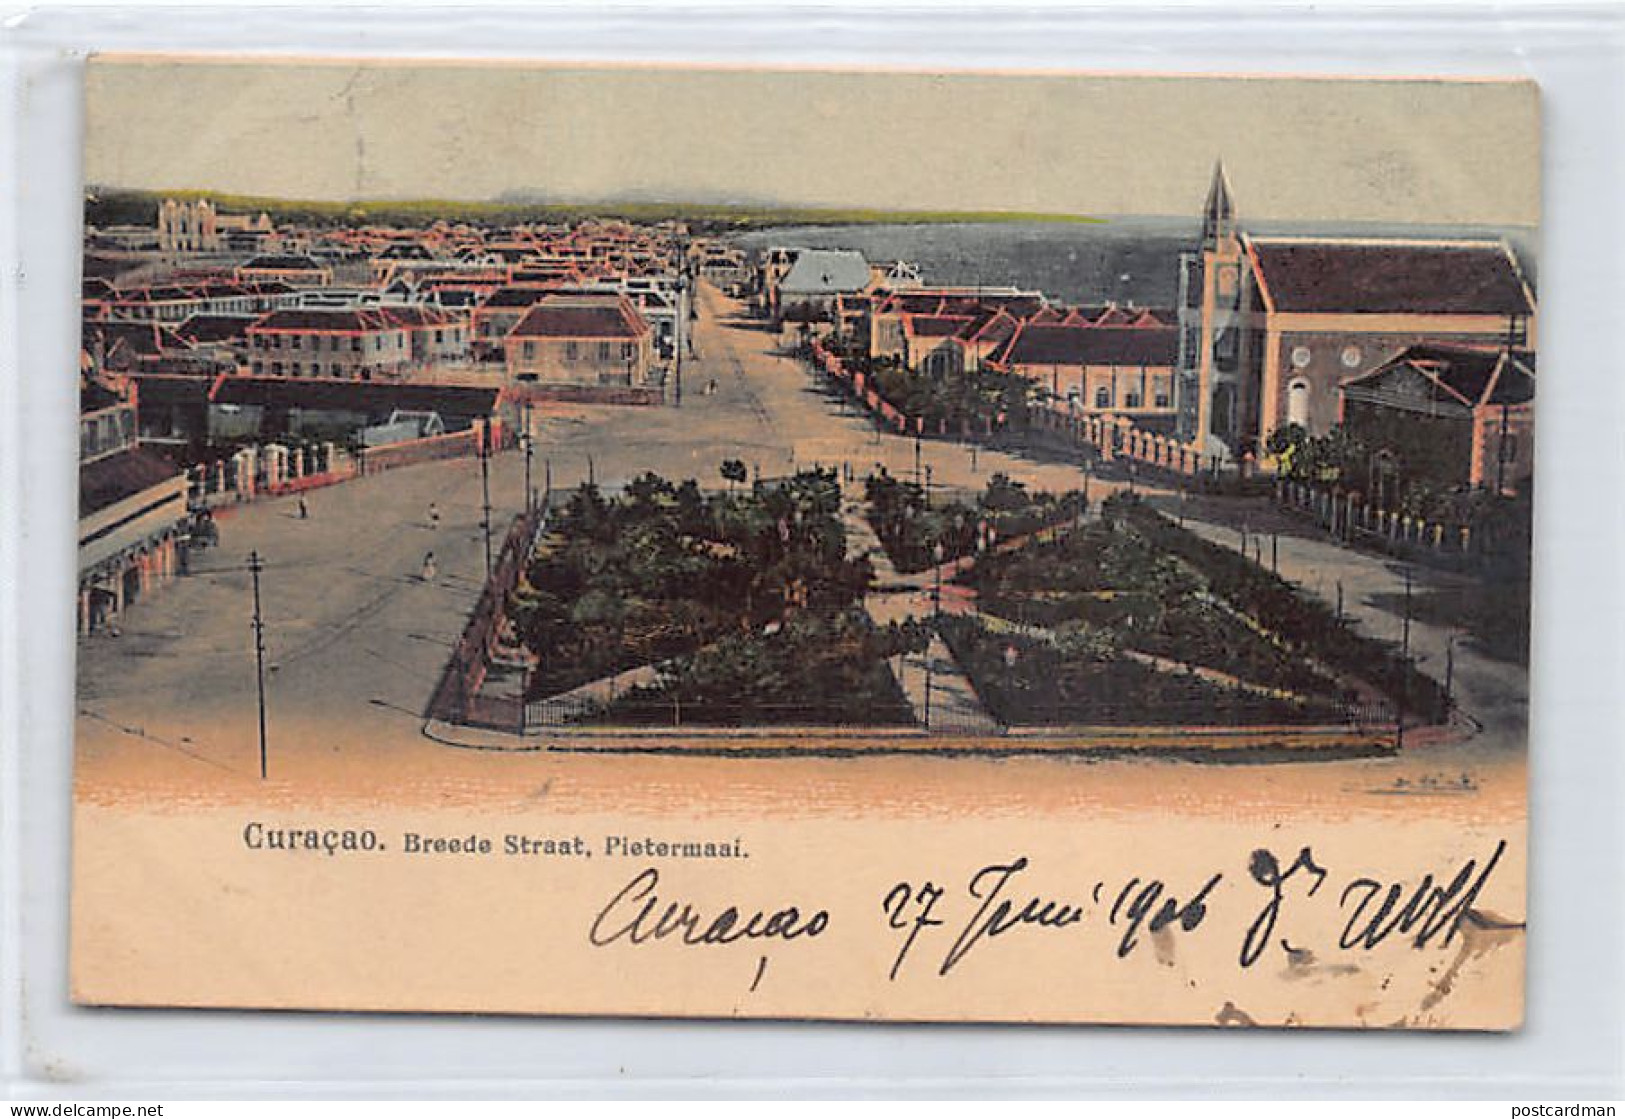 CURAÇAO - Breede Straat, Pietermaai - Synagogue On The Right - Publ. Unknown  - Curaçao